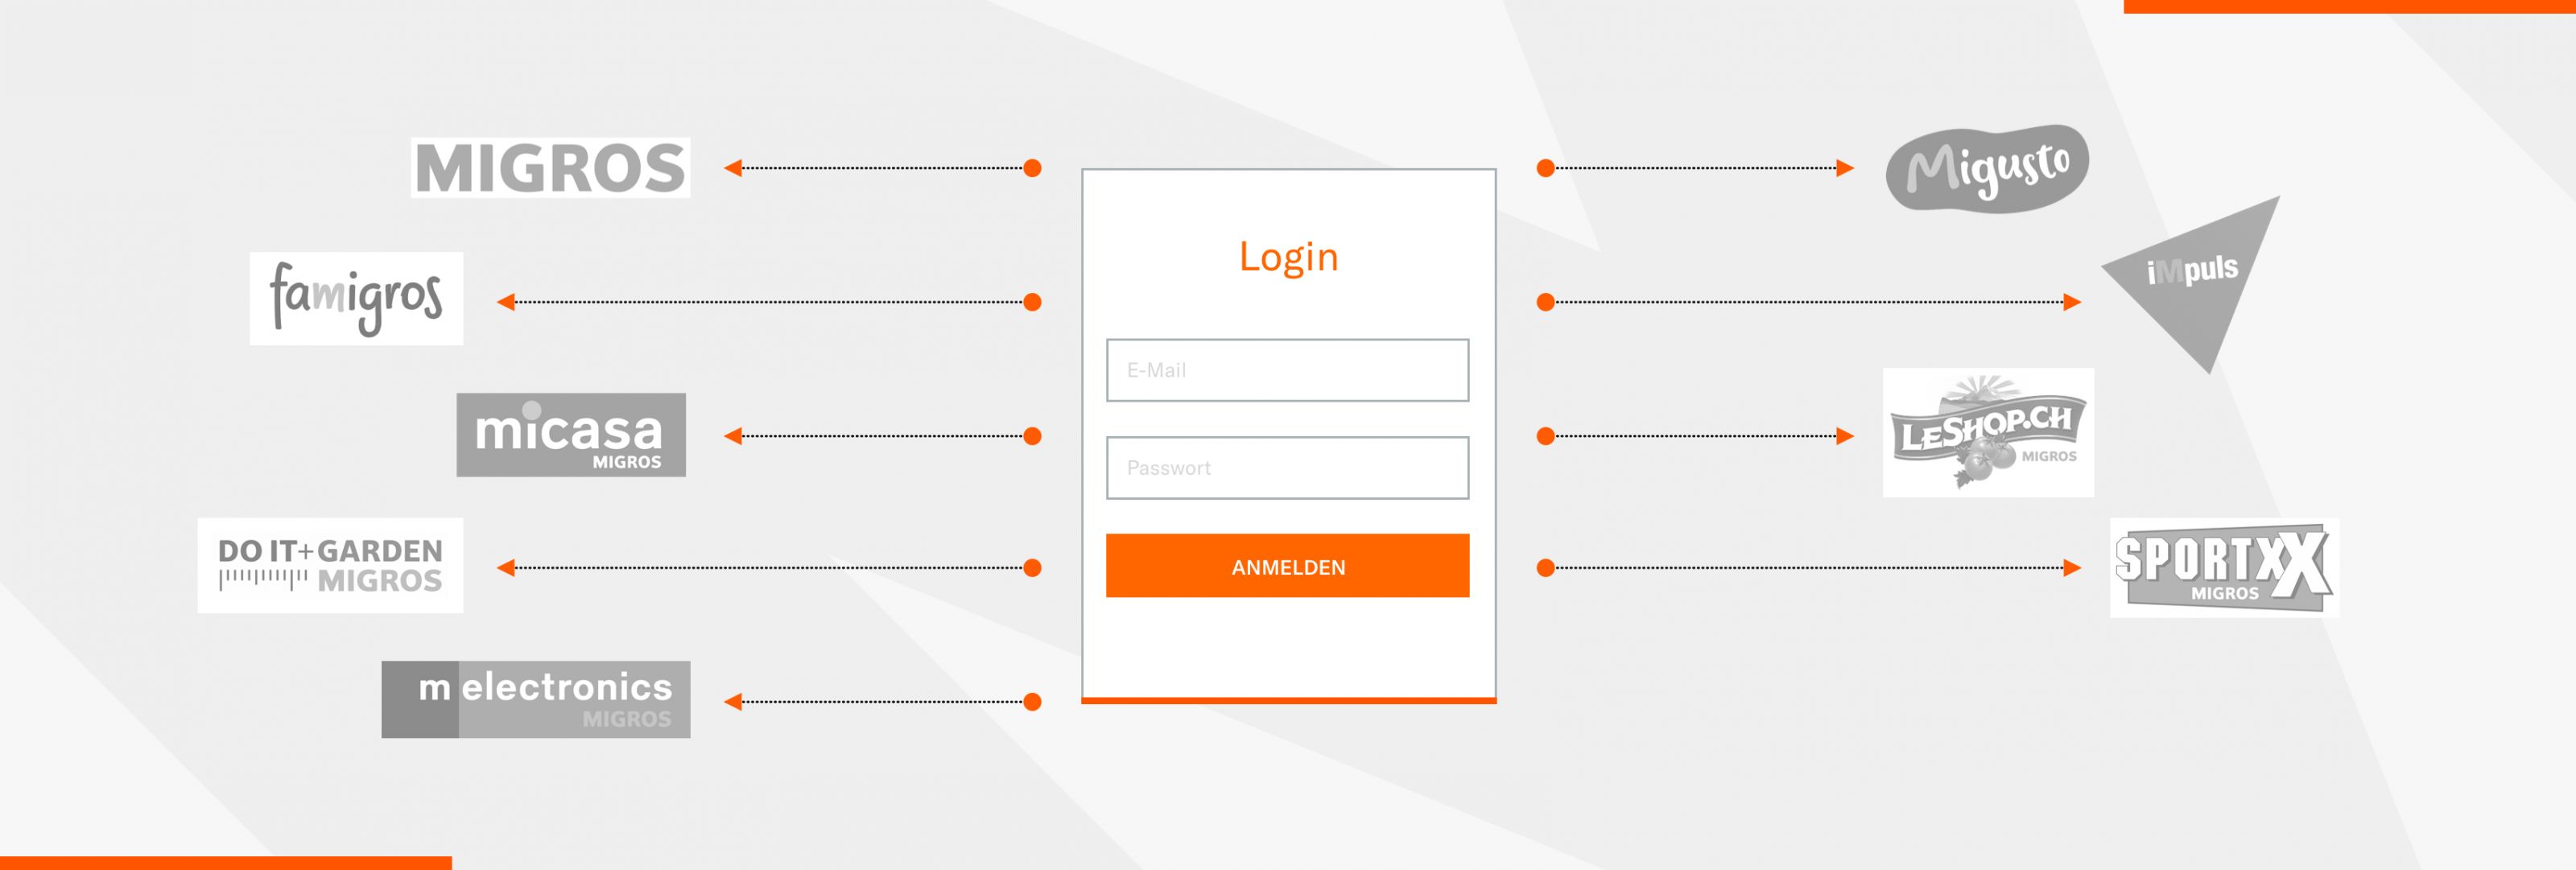 Merkle success story Migros: we create central login for many platforms